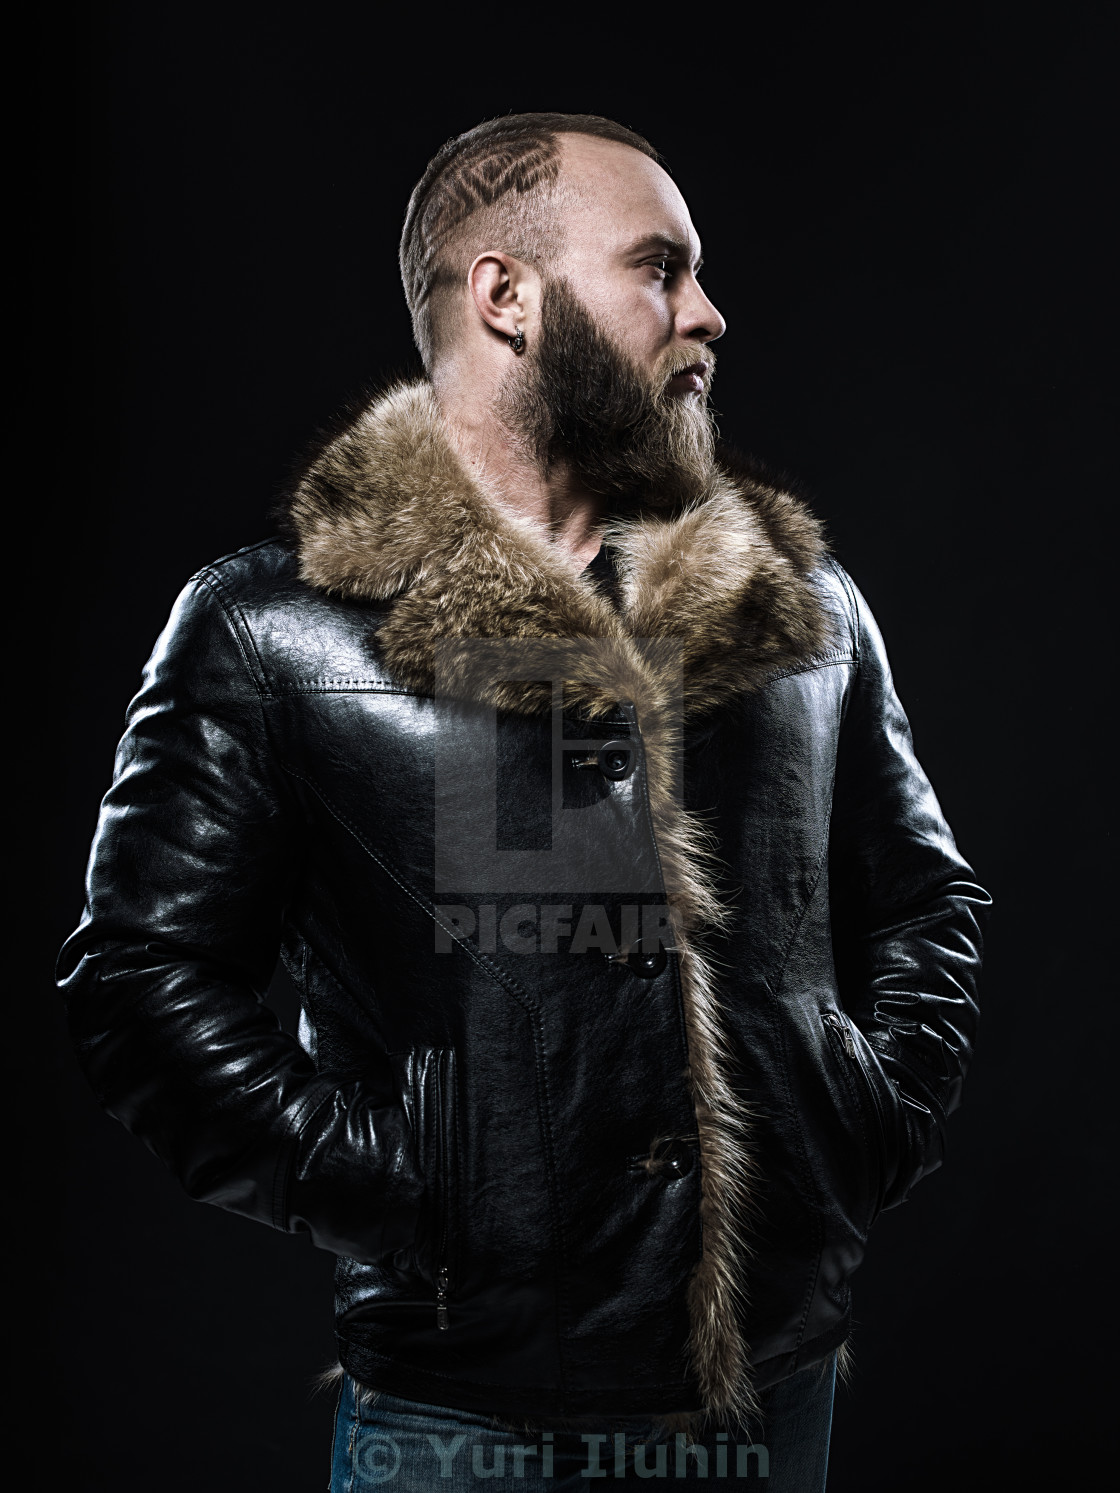 Brutal Handsome Unshaven Man With Long Beard And Moustache In Black Fur Coat With Collar